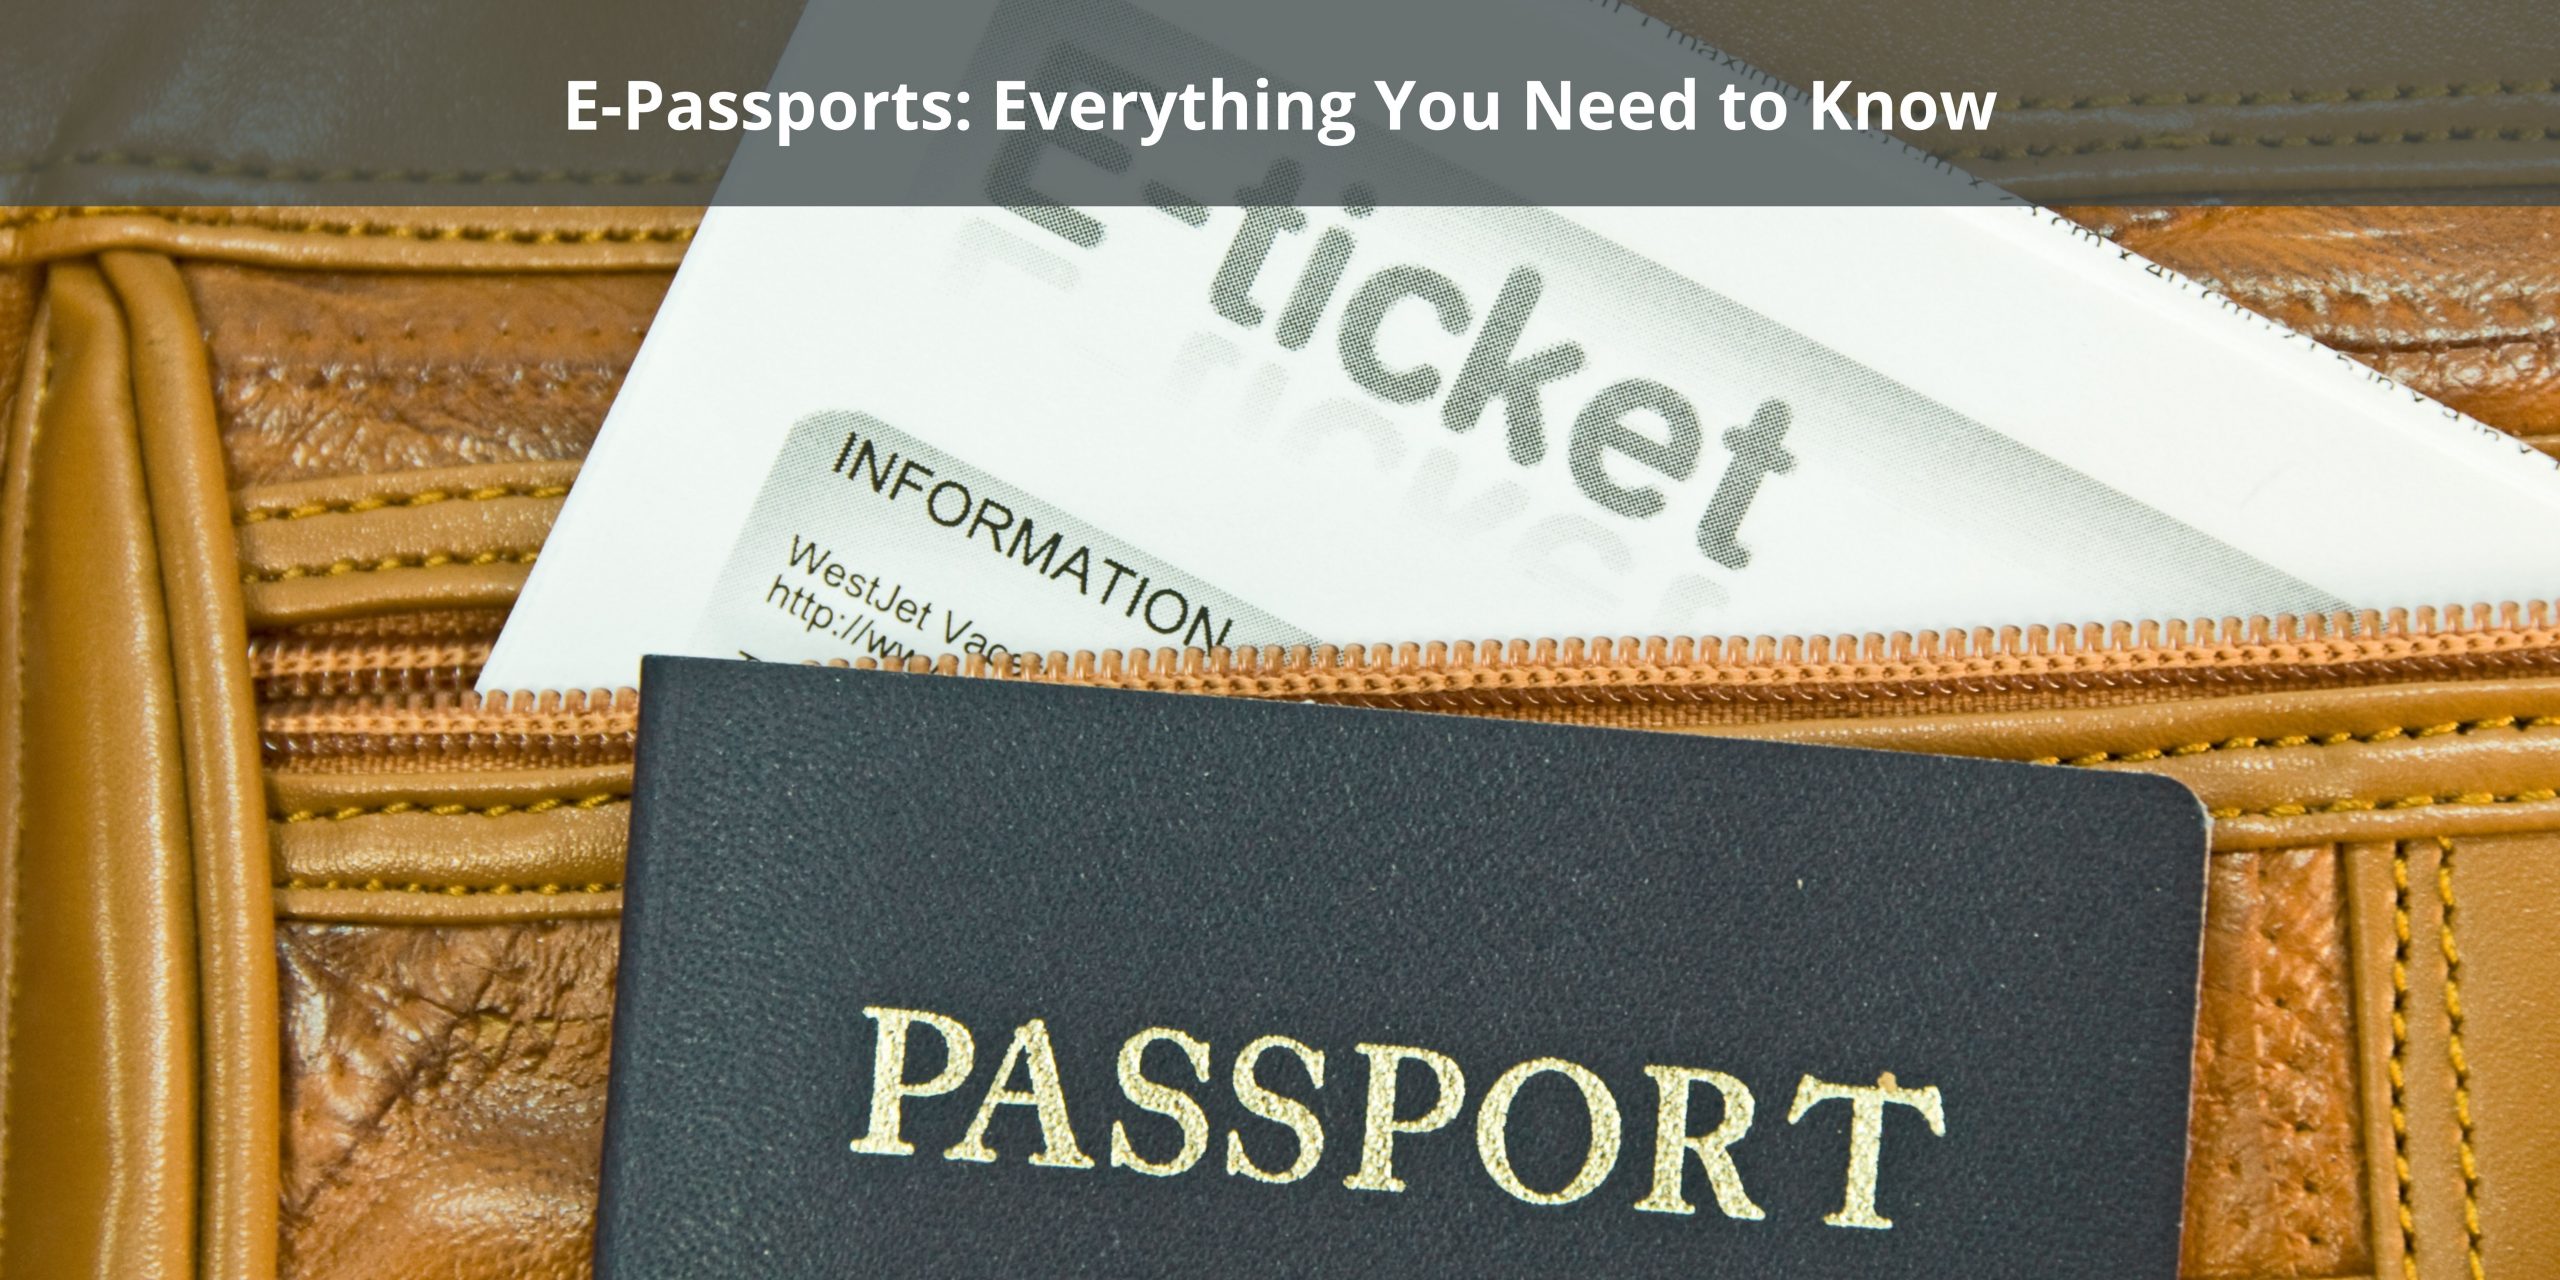 E-Passports: Everything You Need to Know